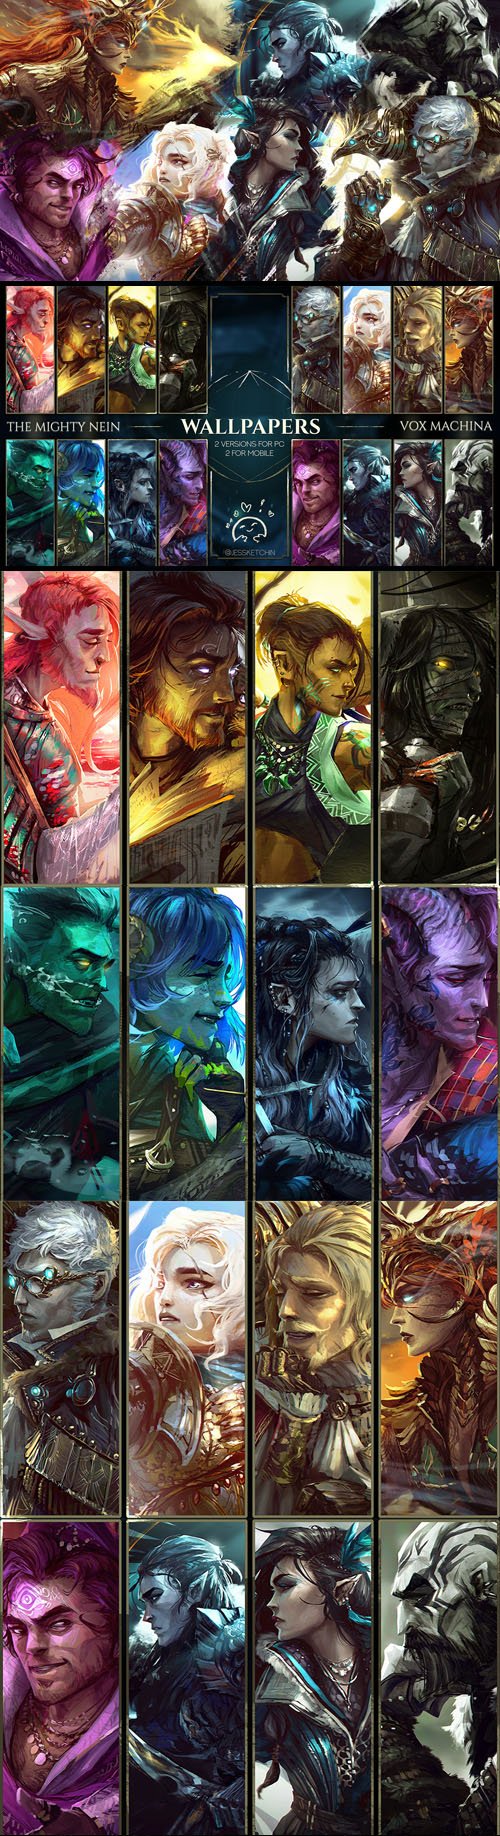 The Mighty Nein & Vox Machina - Mega Wallpaper Pack (PC/Mobile)